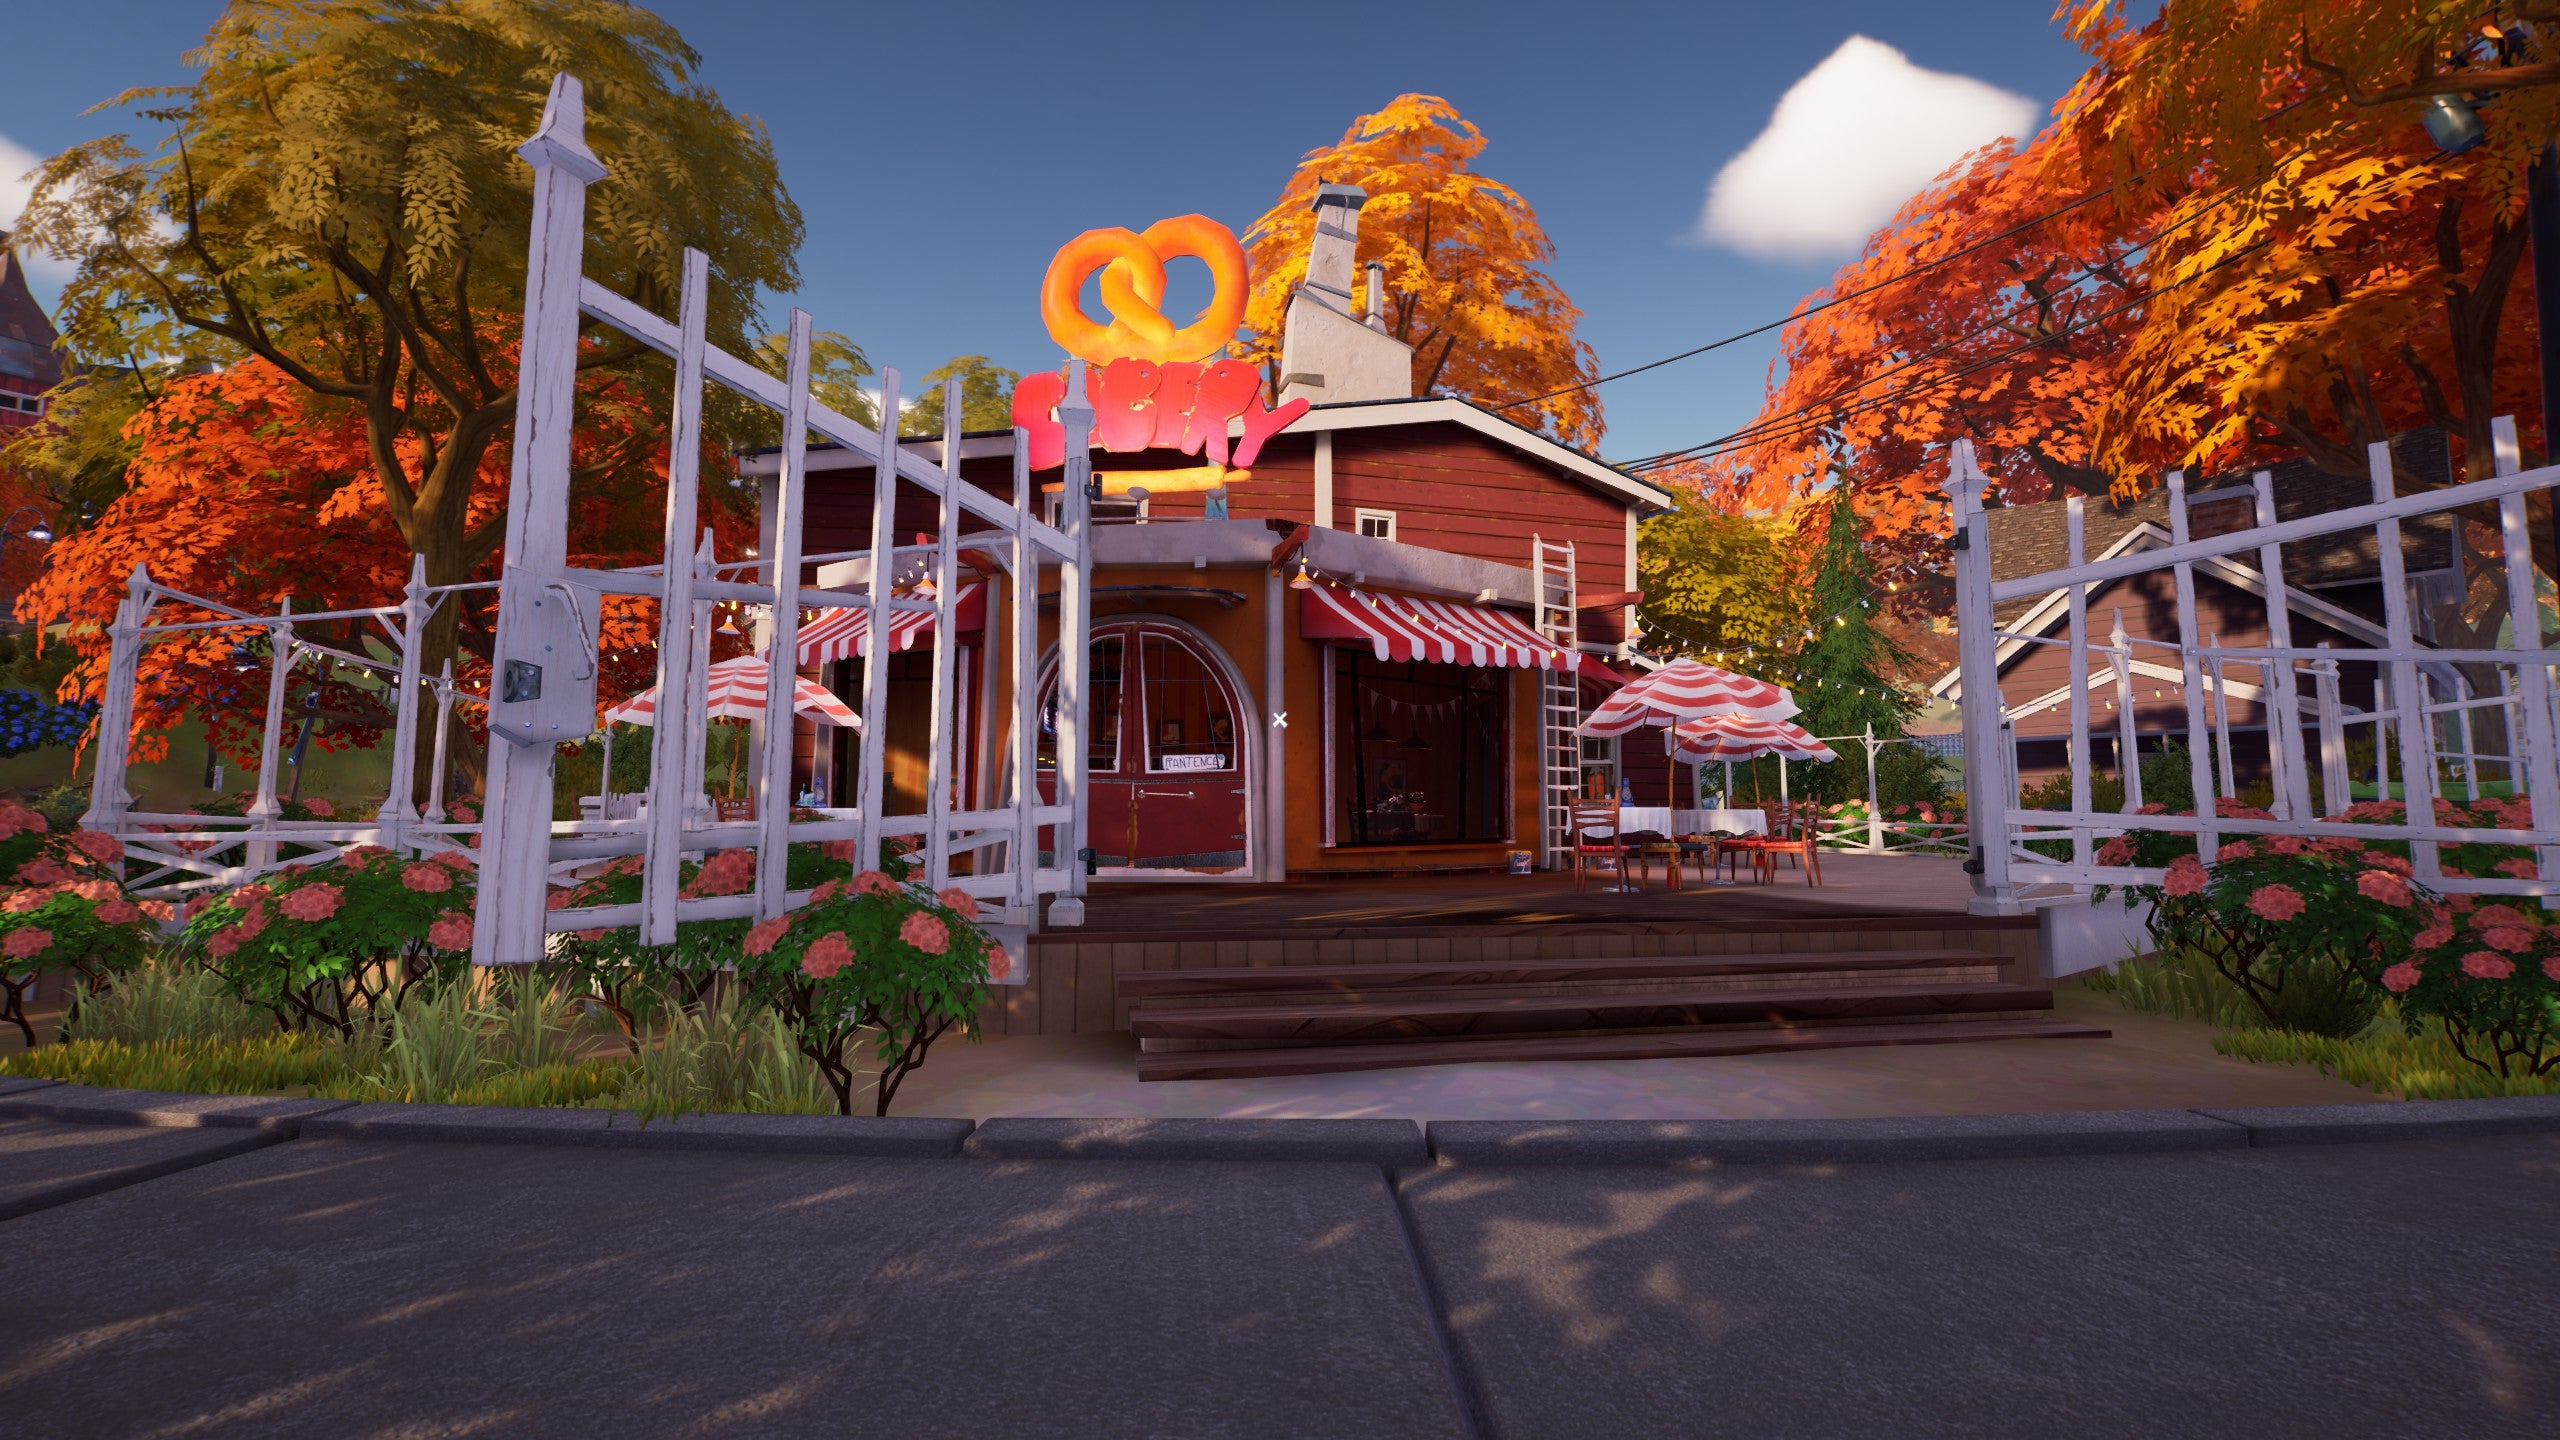 The outside of the mysterious bakery in Hello Neighbor 2